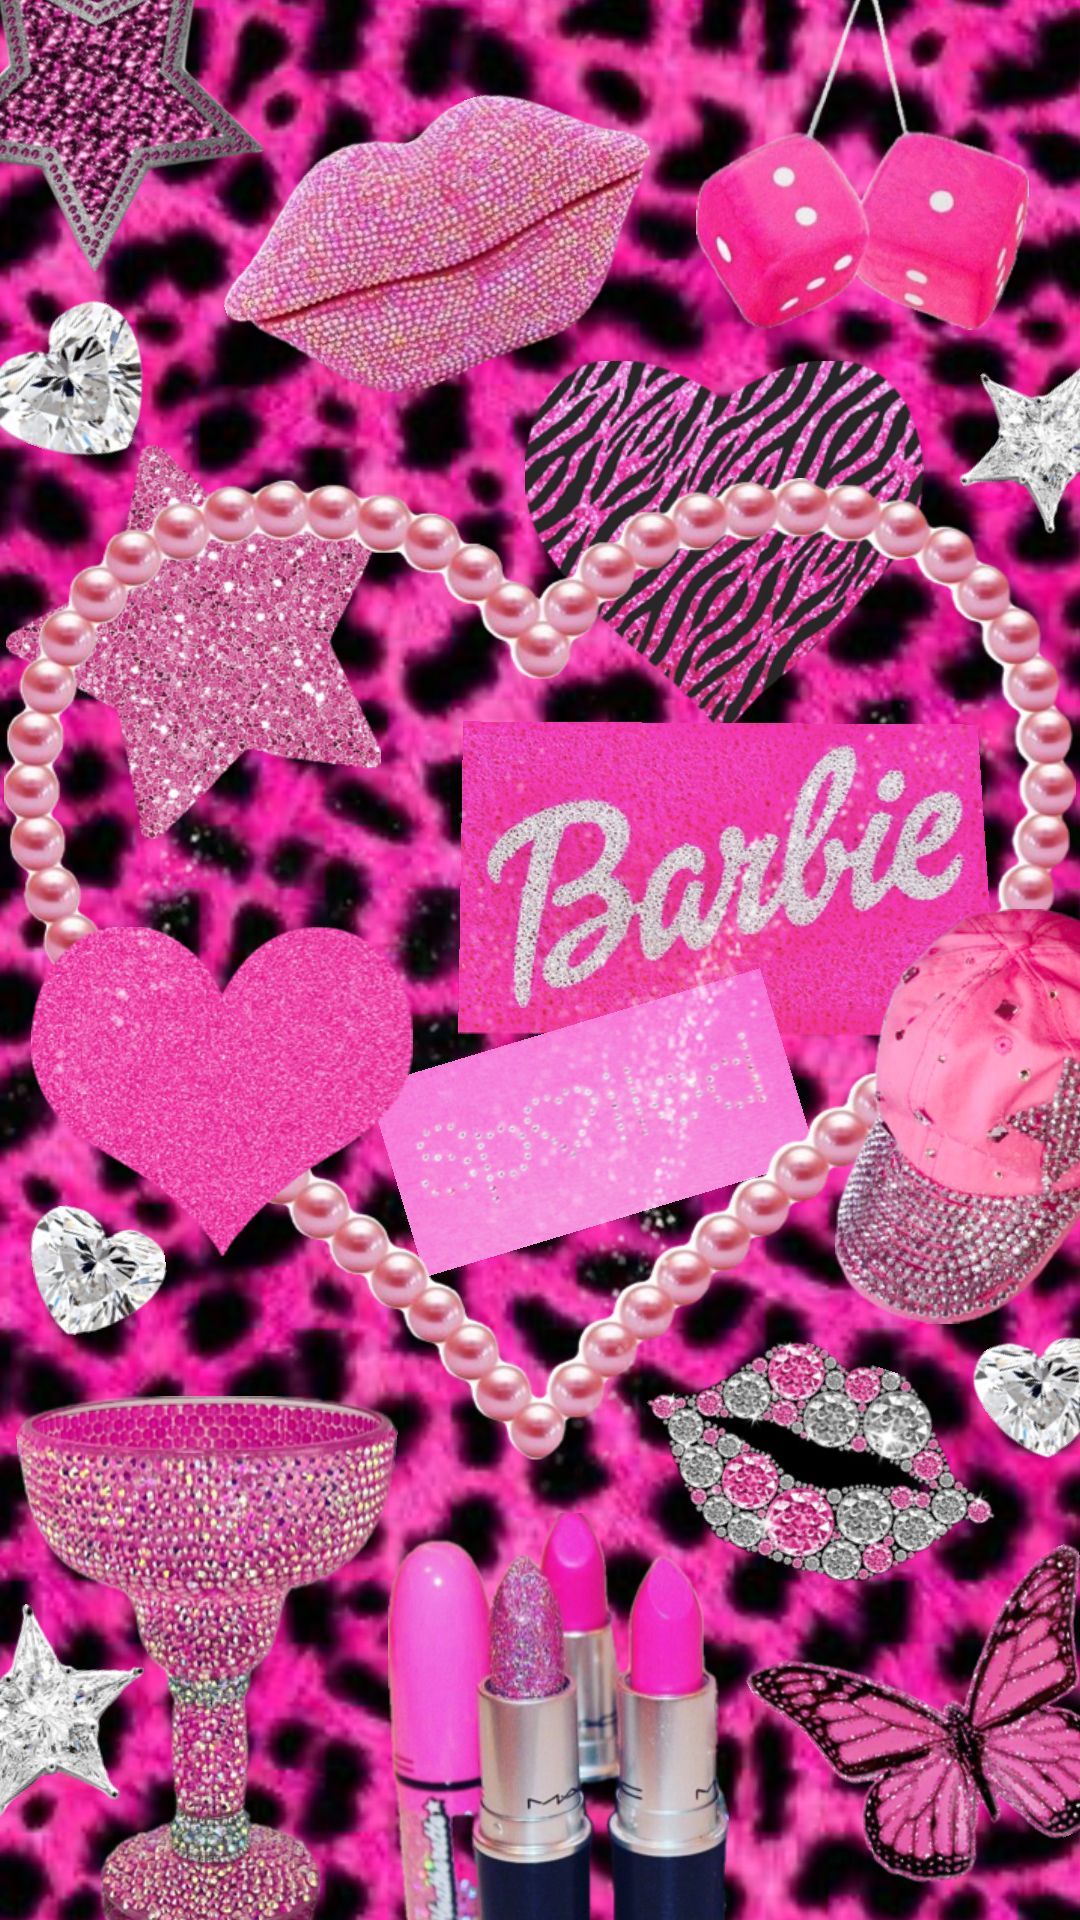 IPhone wallpaper girly barbie with high-resolution 1080x1920 pixel. You can use this wallpaper for your iPhone 5, 6, 7, 8, X, XS, XR backgrounds, Mobile Screensaver, or iPad Lock Screen - Barbie